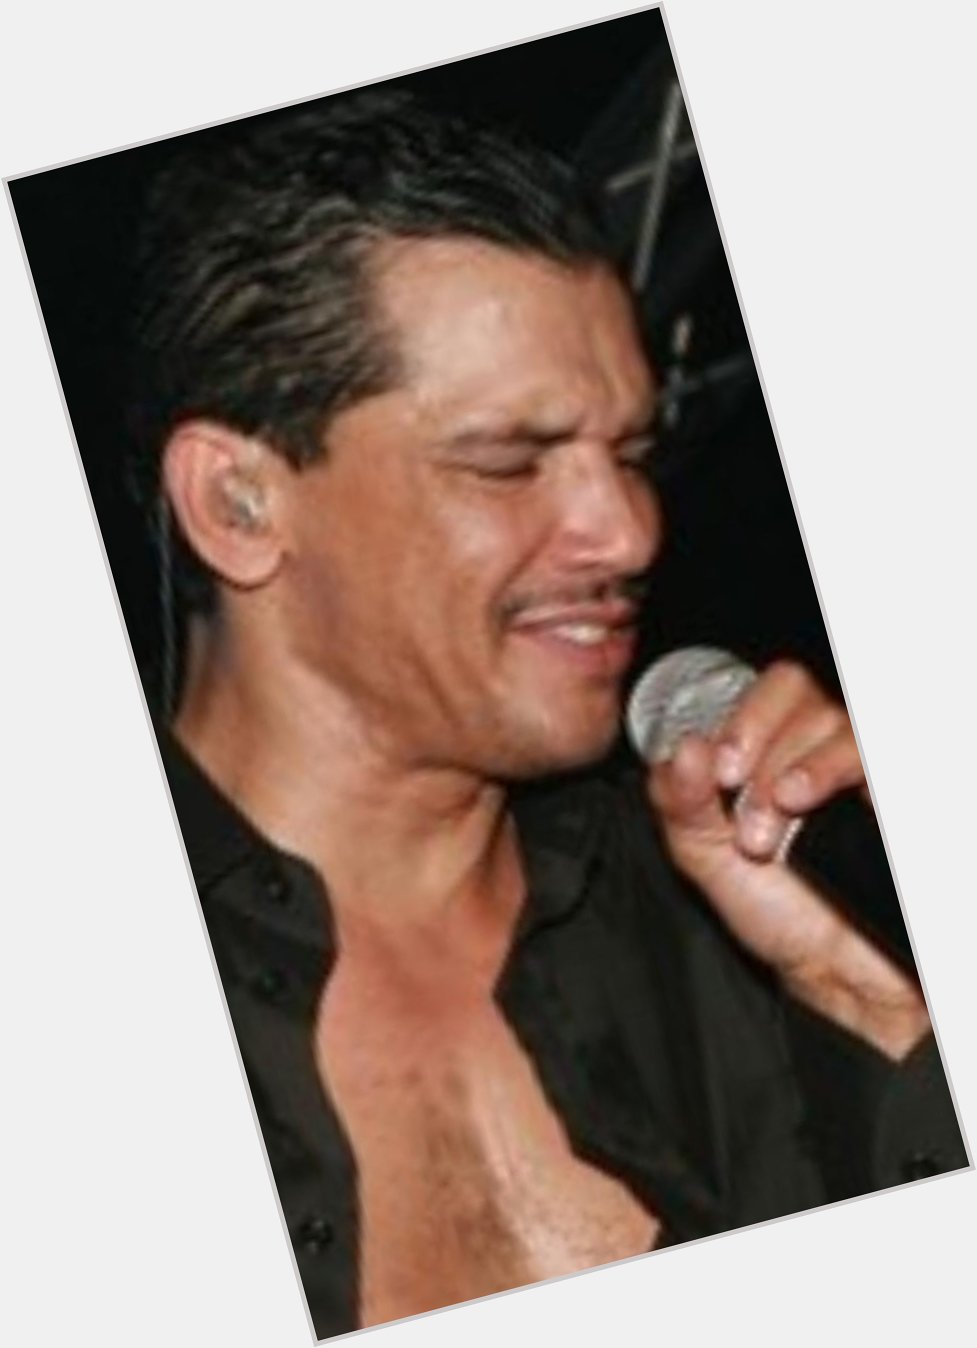 HAPPY BIRTHDAY TO MY FRIEND MR. EL DEBARGE GET MY BOOK SNEAKING IN WITH THE STARS 44 YRS AND COUNTING 